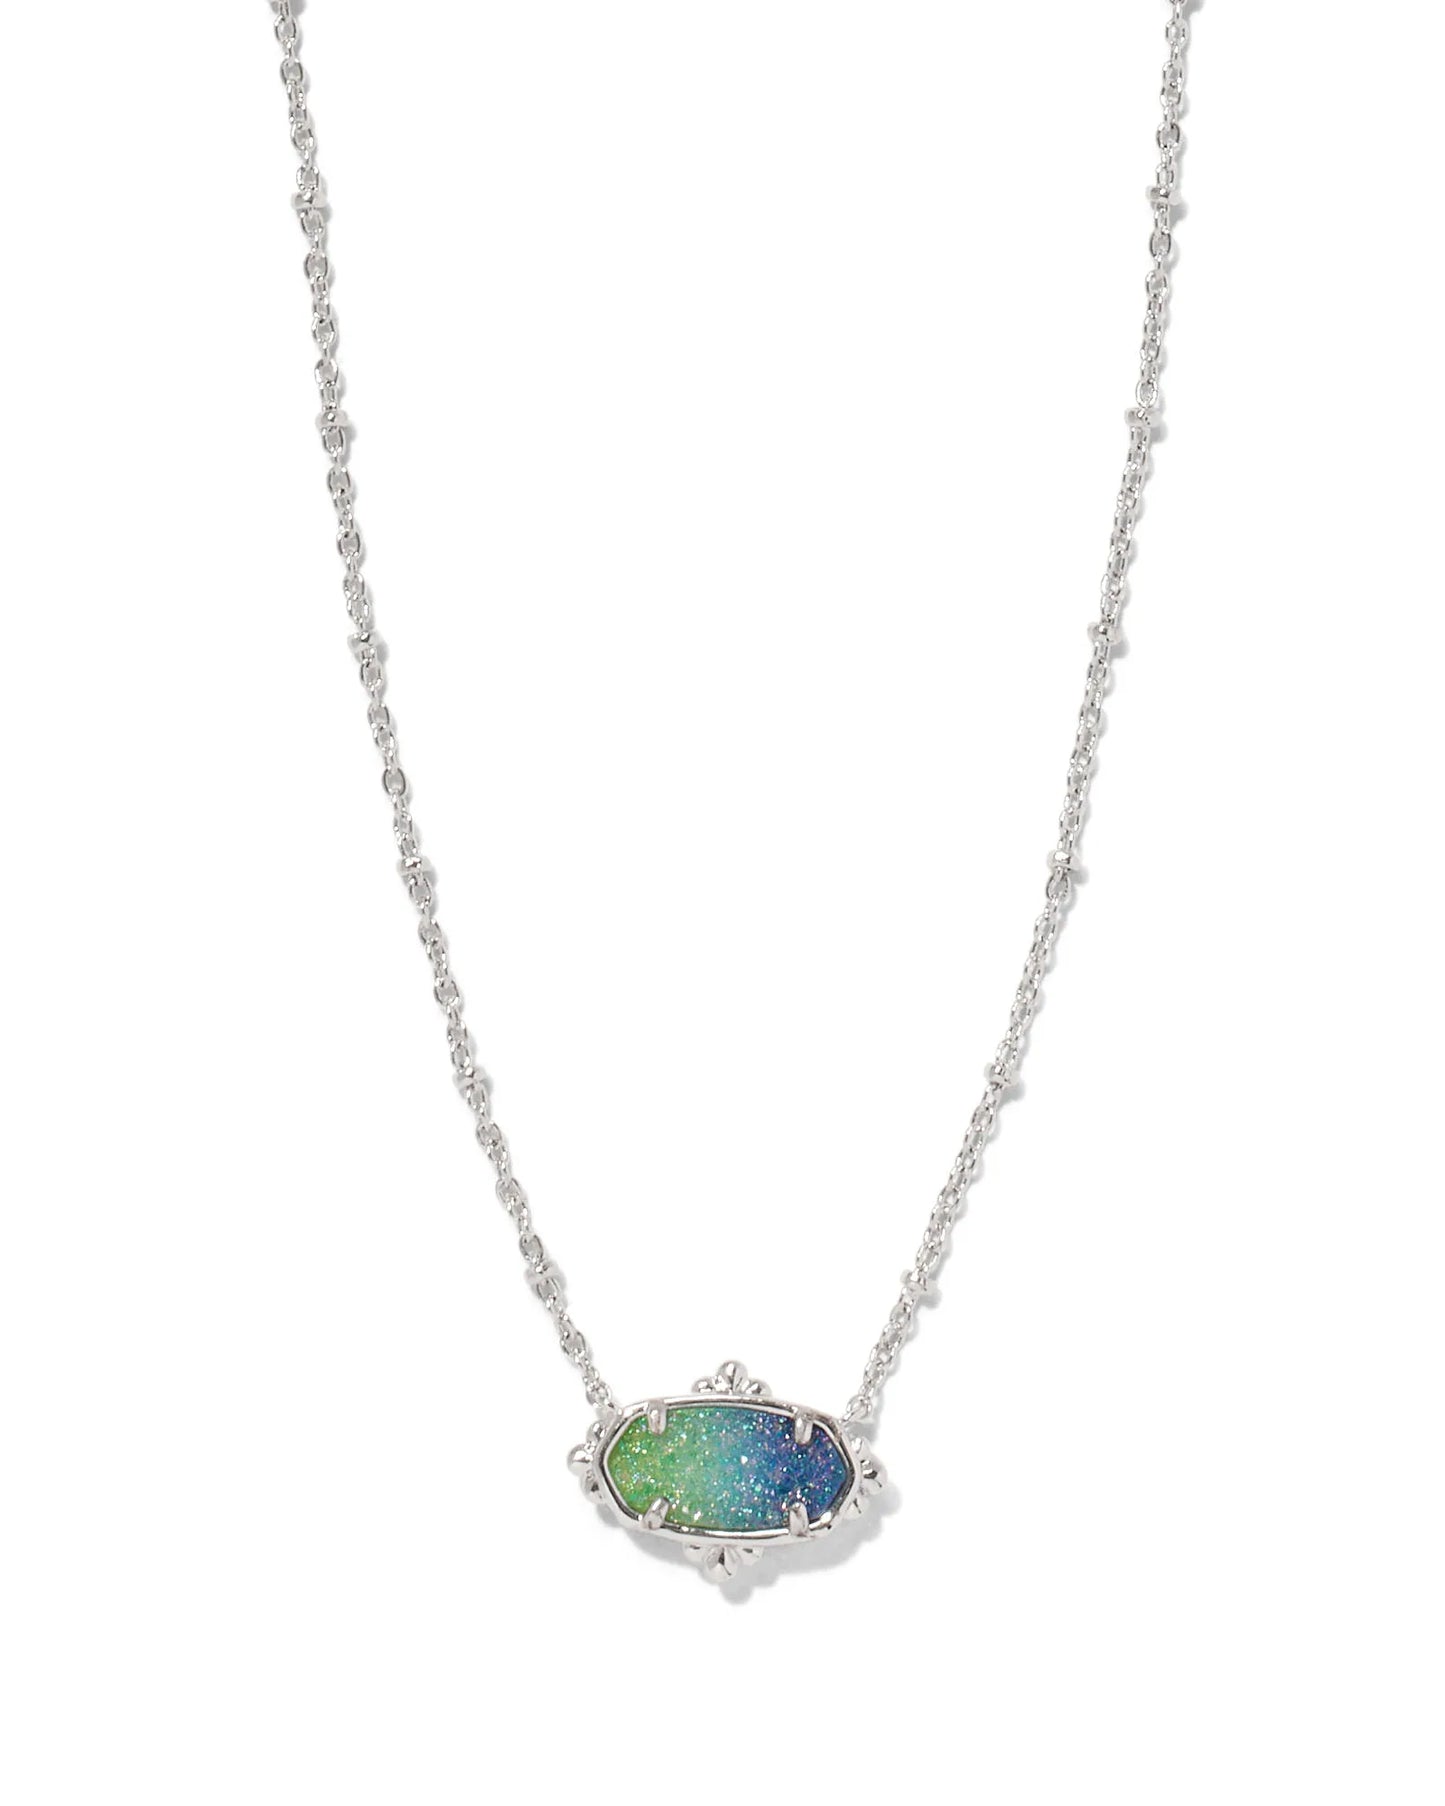 silver pendant necklace with a blue and green drusy ombre stone. 